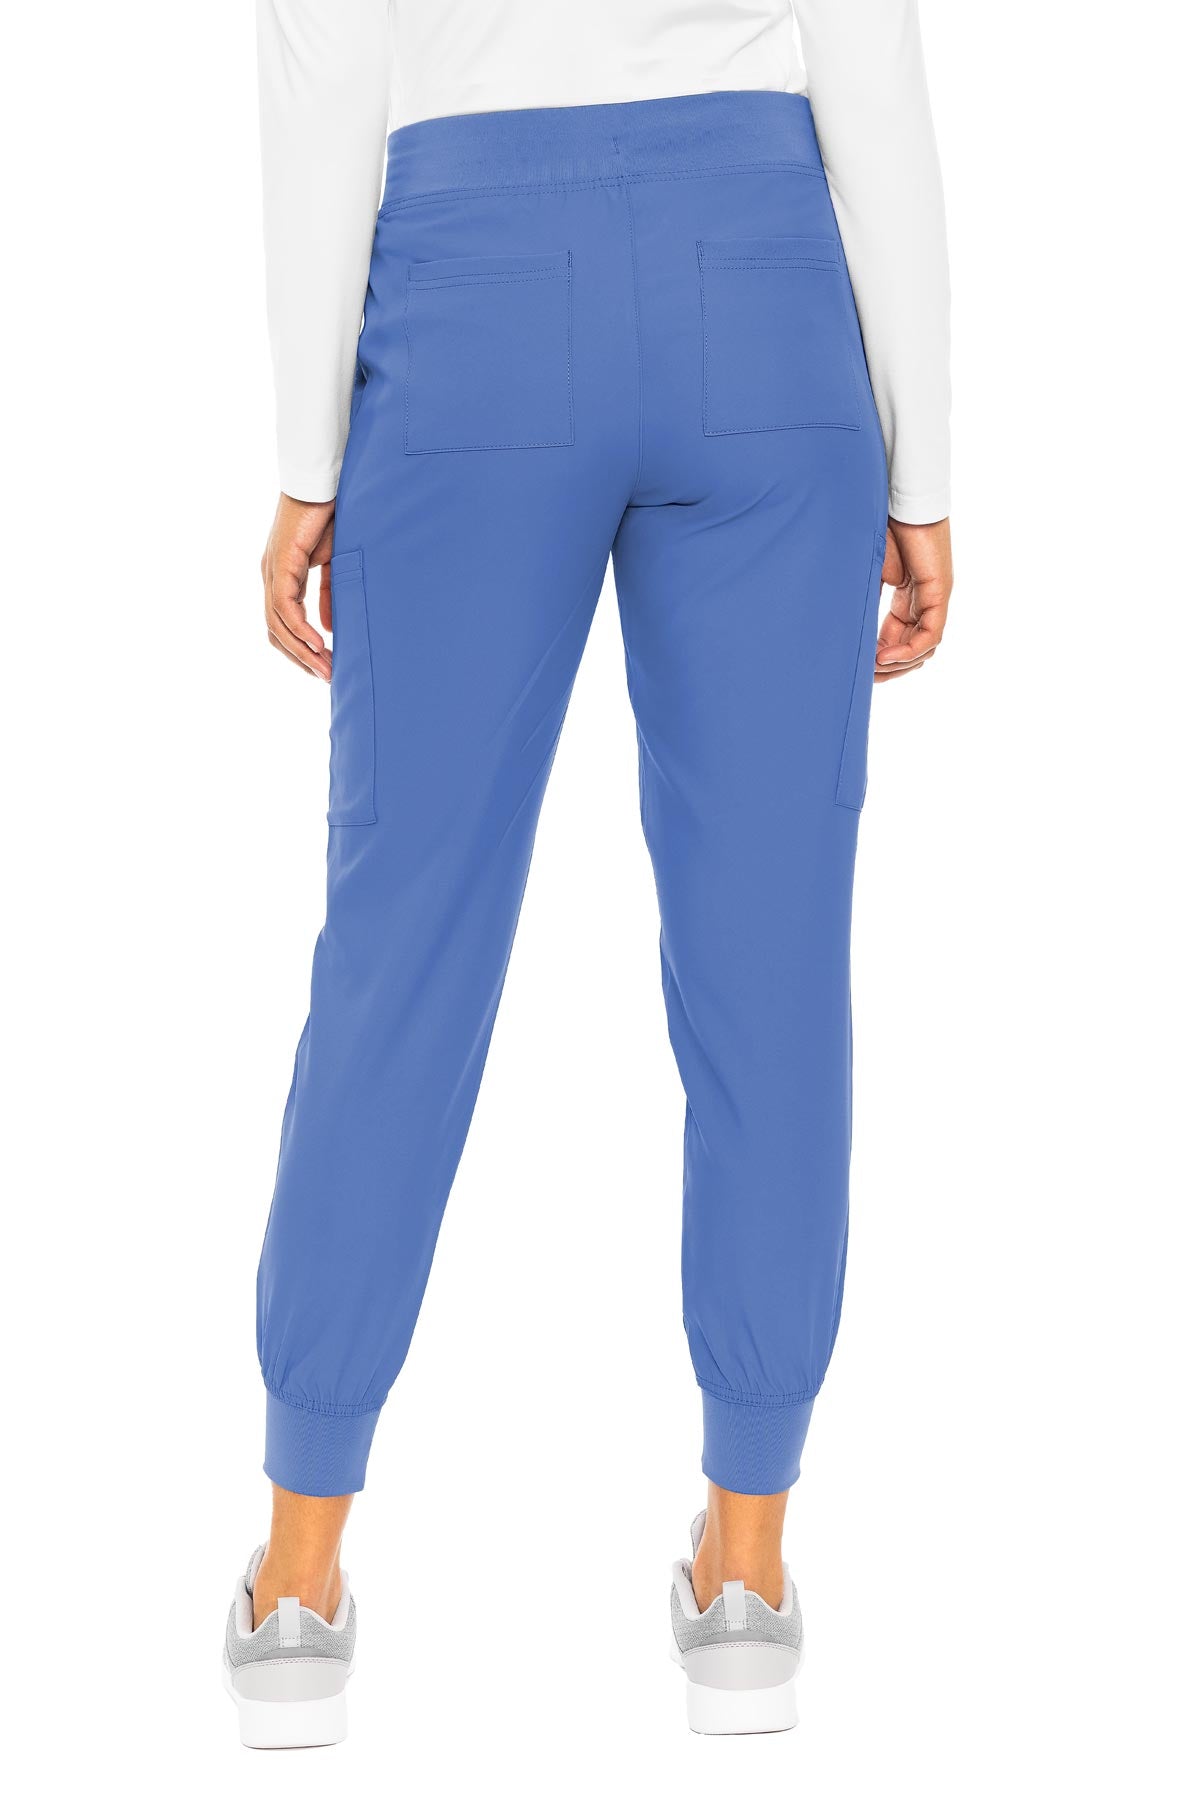 Med Couture 2711 Insight Jogger Pant Ceil Back